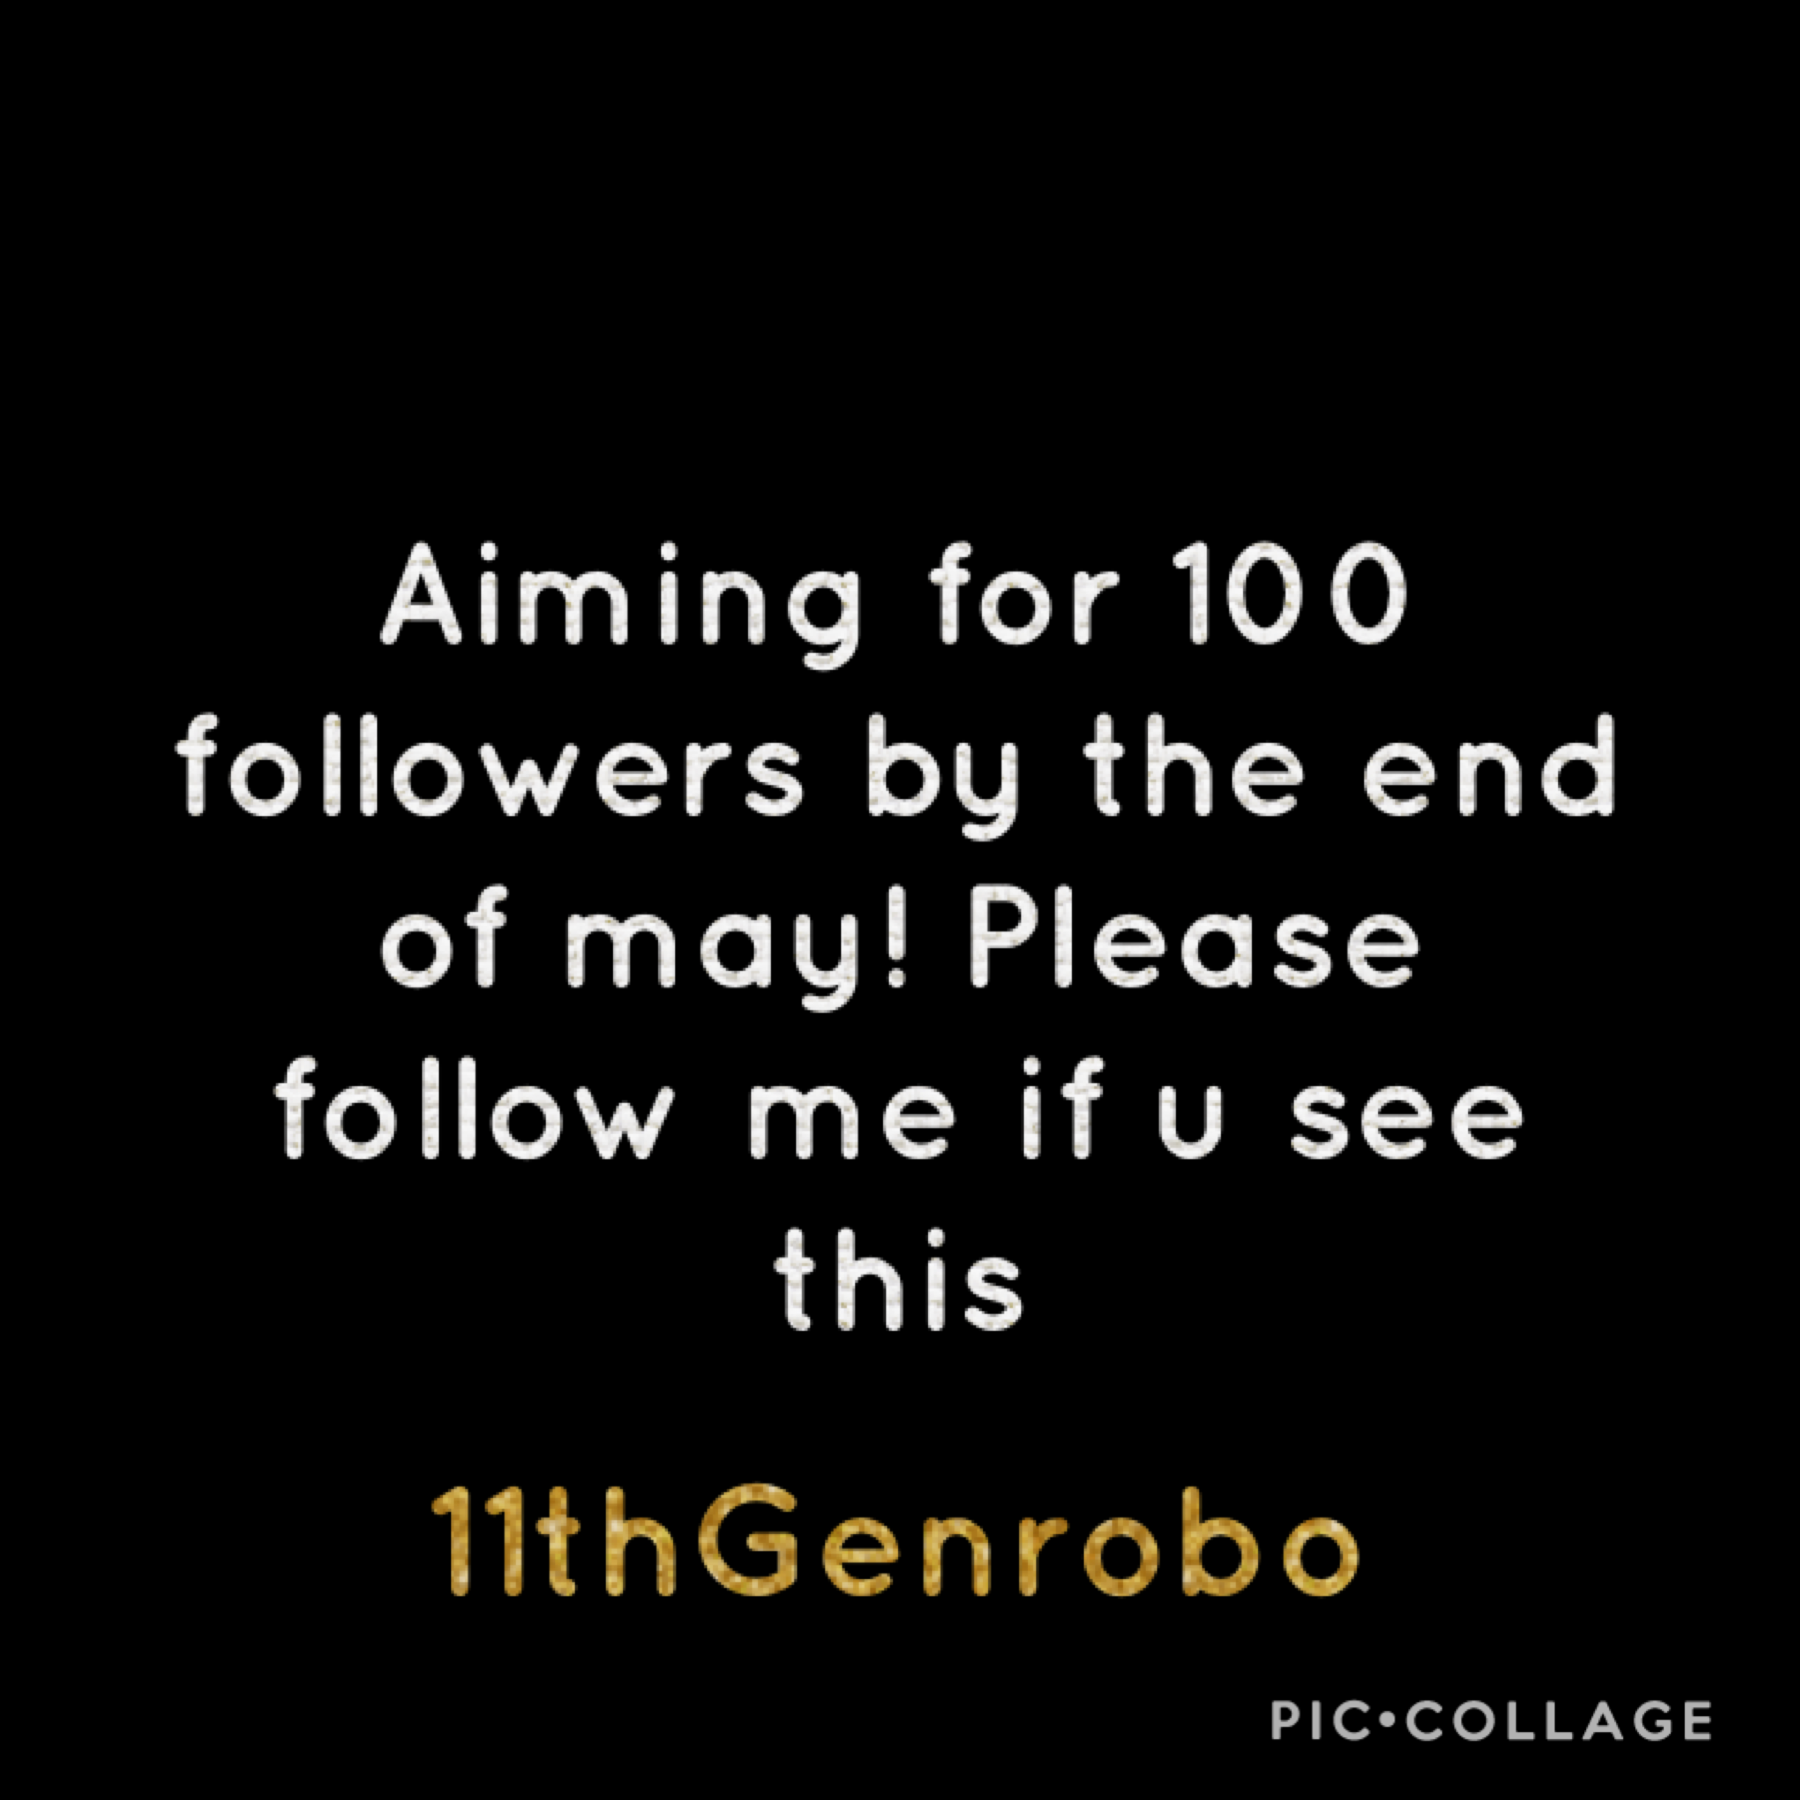 100 followers by the end of may